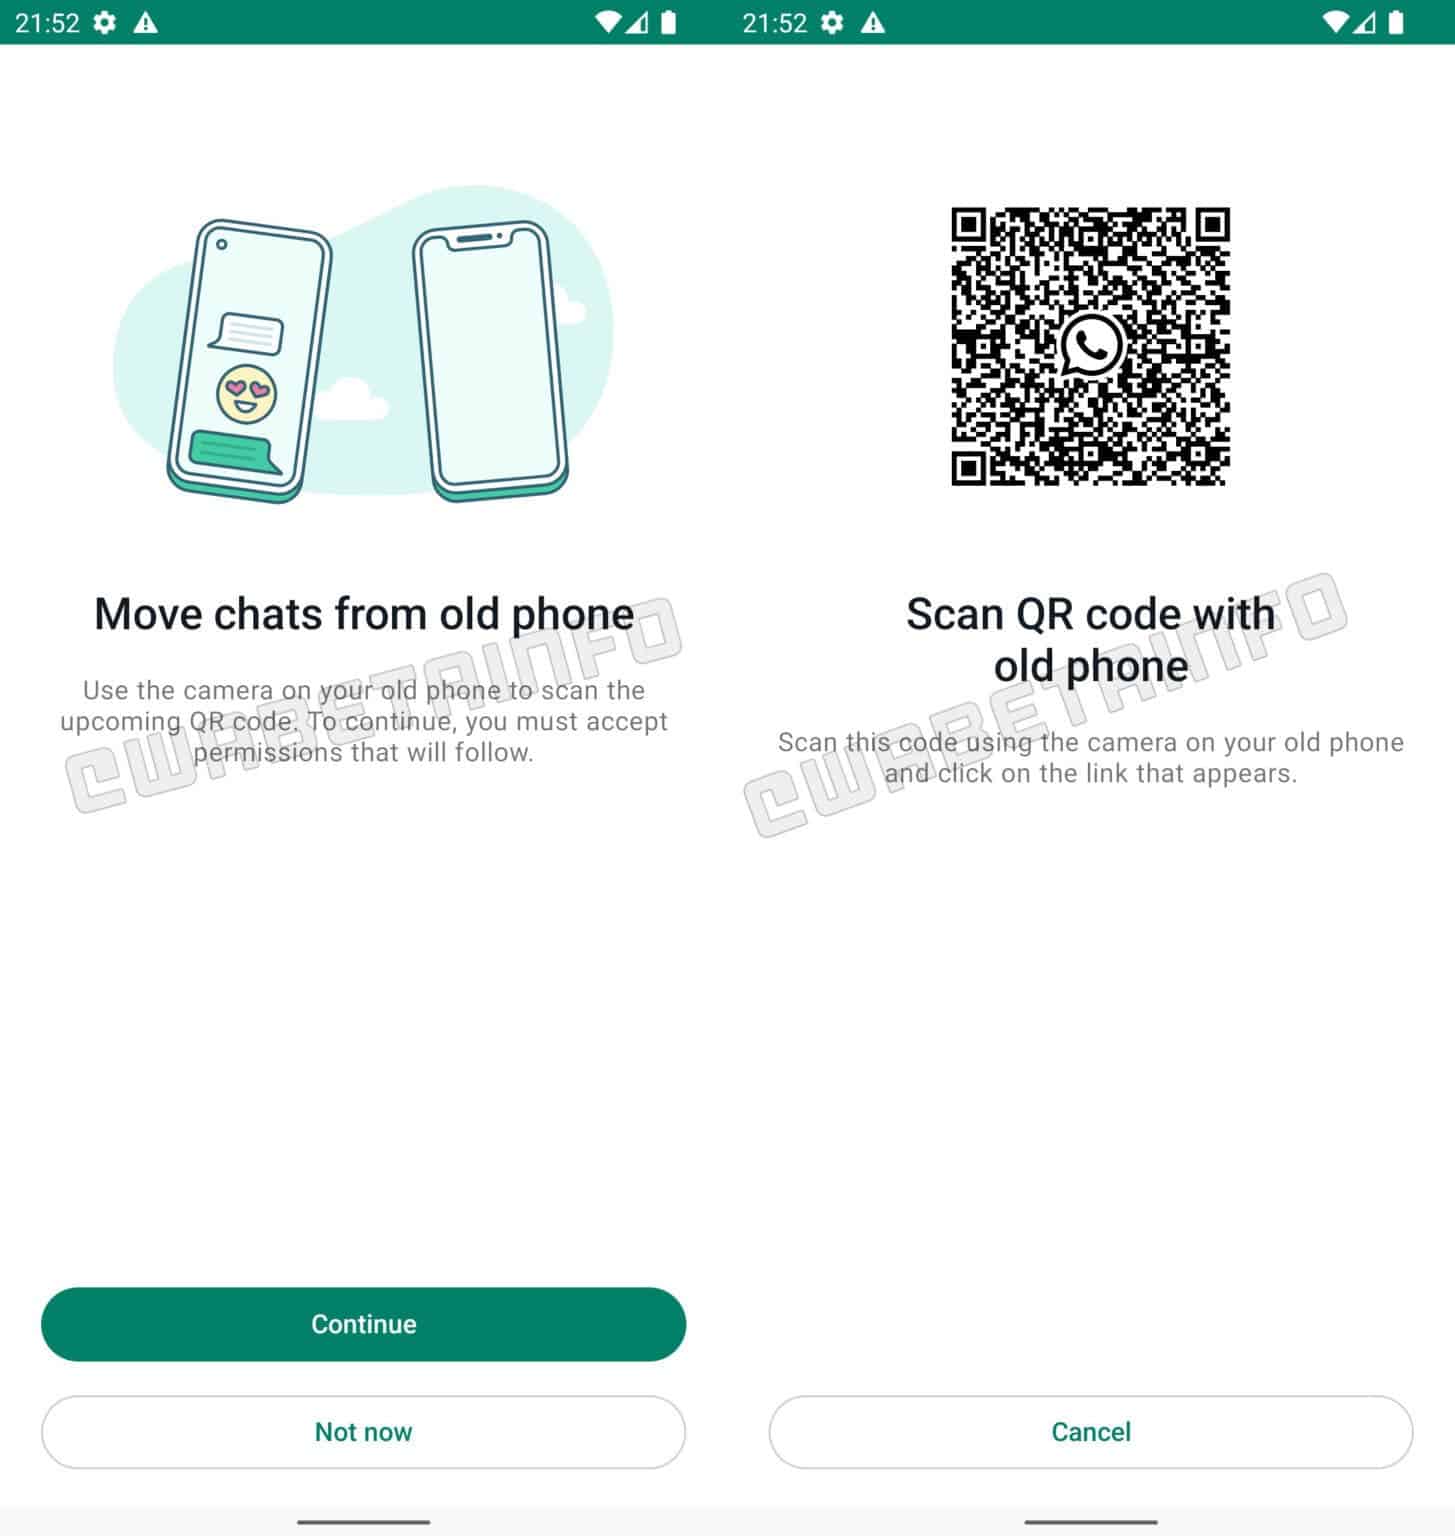 WA CHAT TRANSFER RECEIVE ANDROID 1455x1536 1